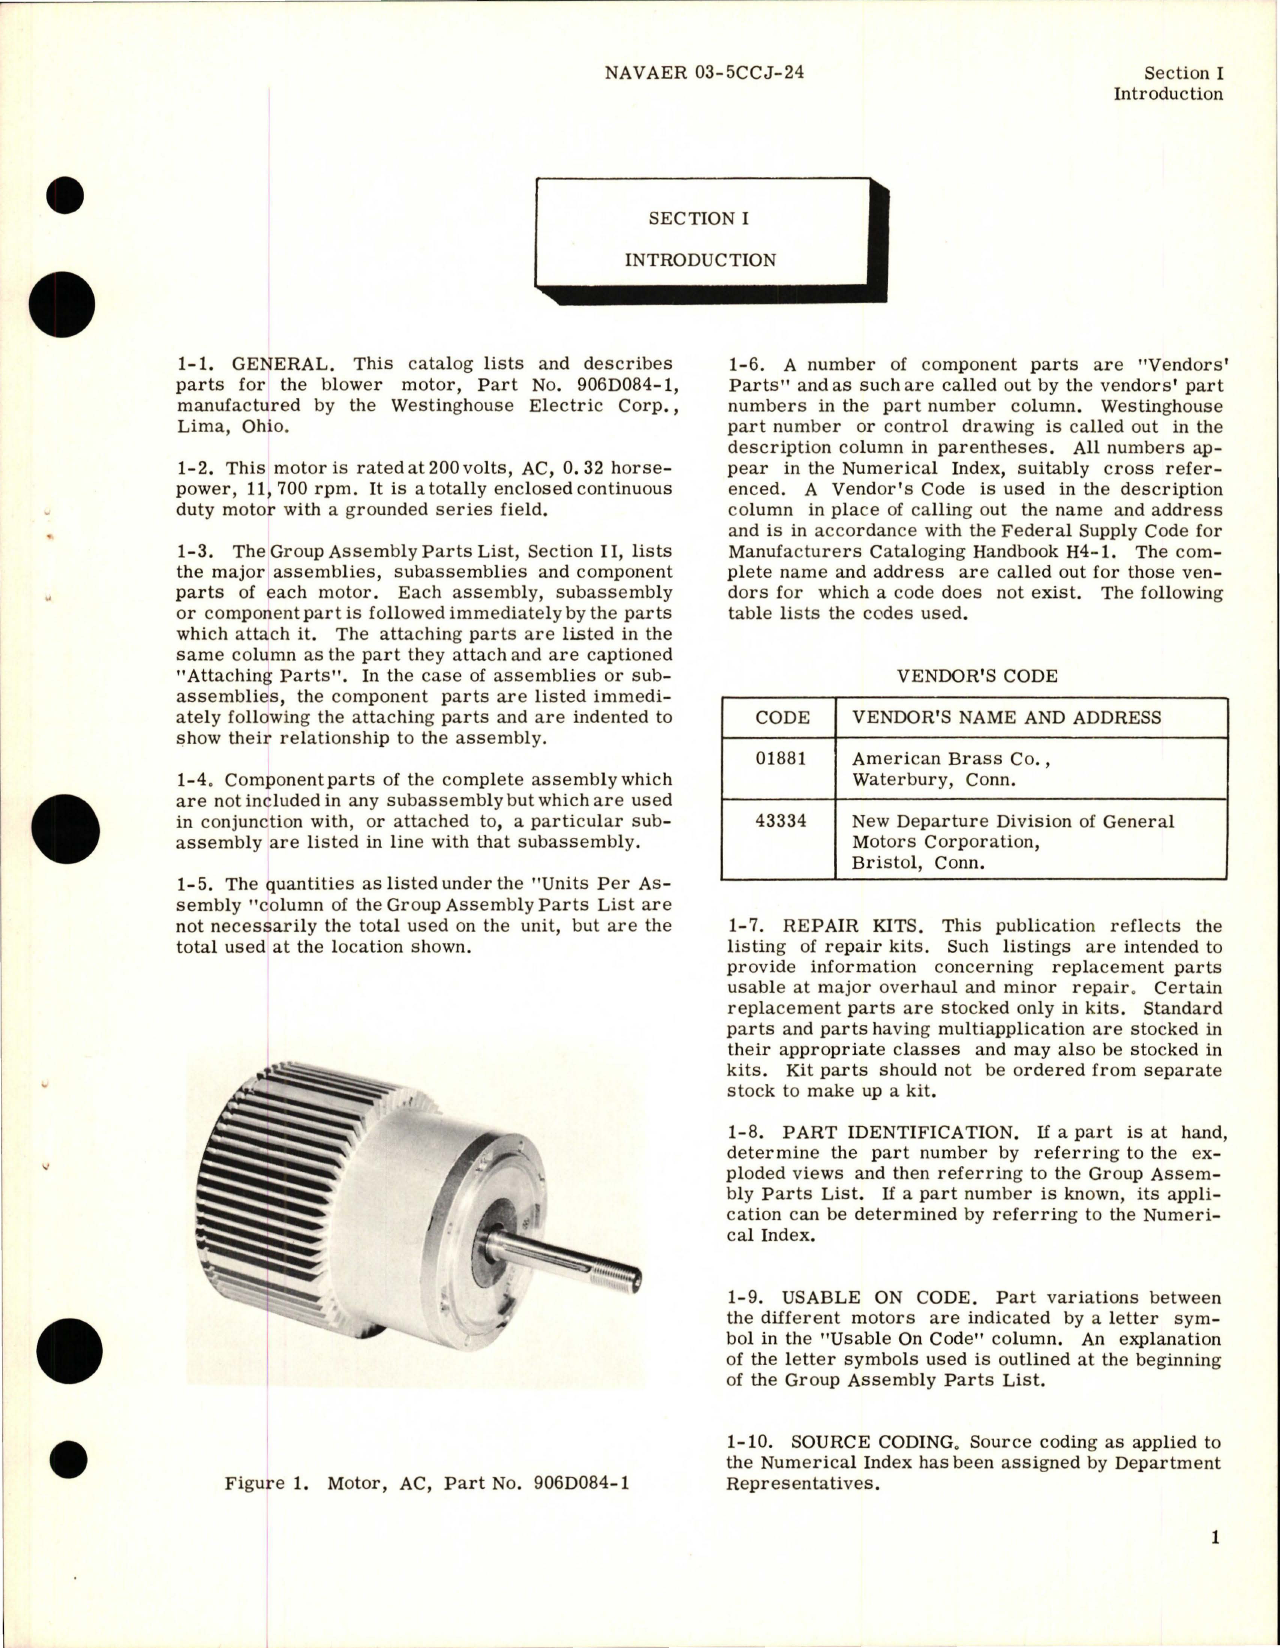 Sample page 5 from AirCorps Library document: Illustrated Parts Breakdown for AC Motor - Part 906D084-1